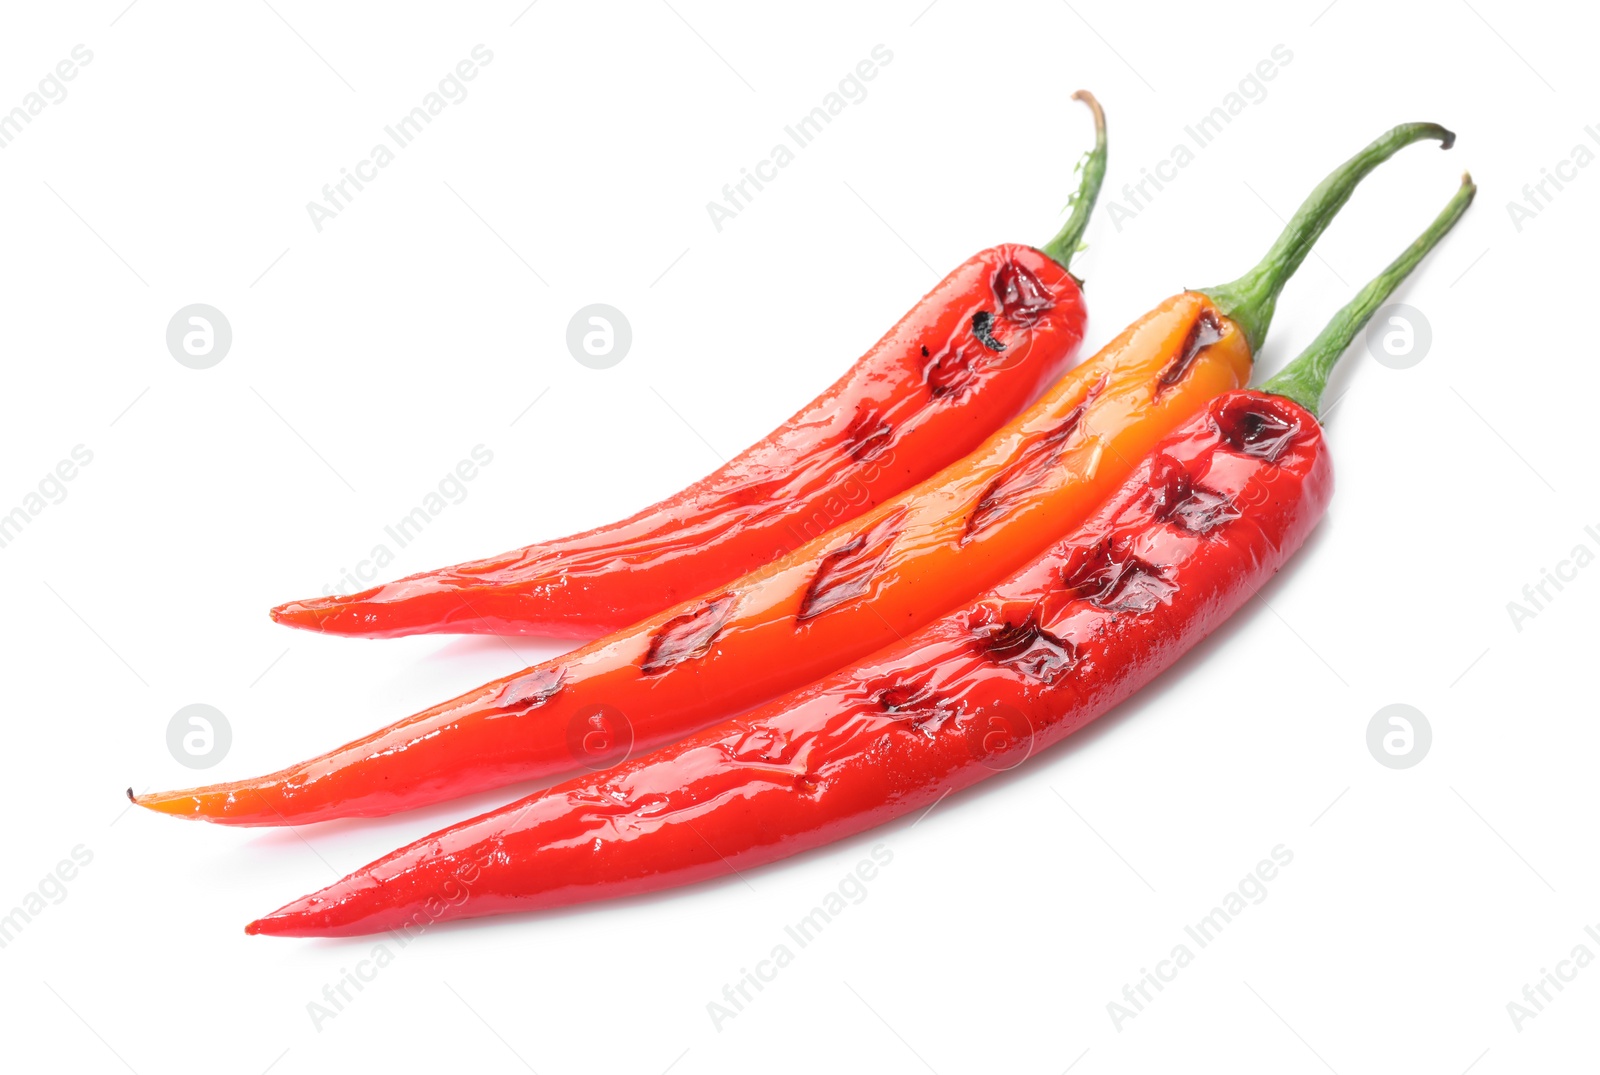 Photo of Tasty grilled chili peppers isolated on white